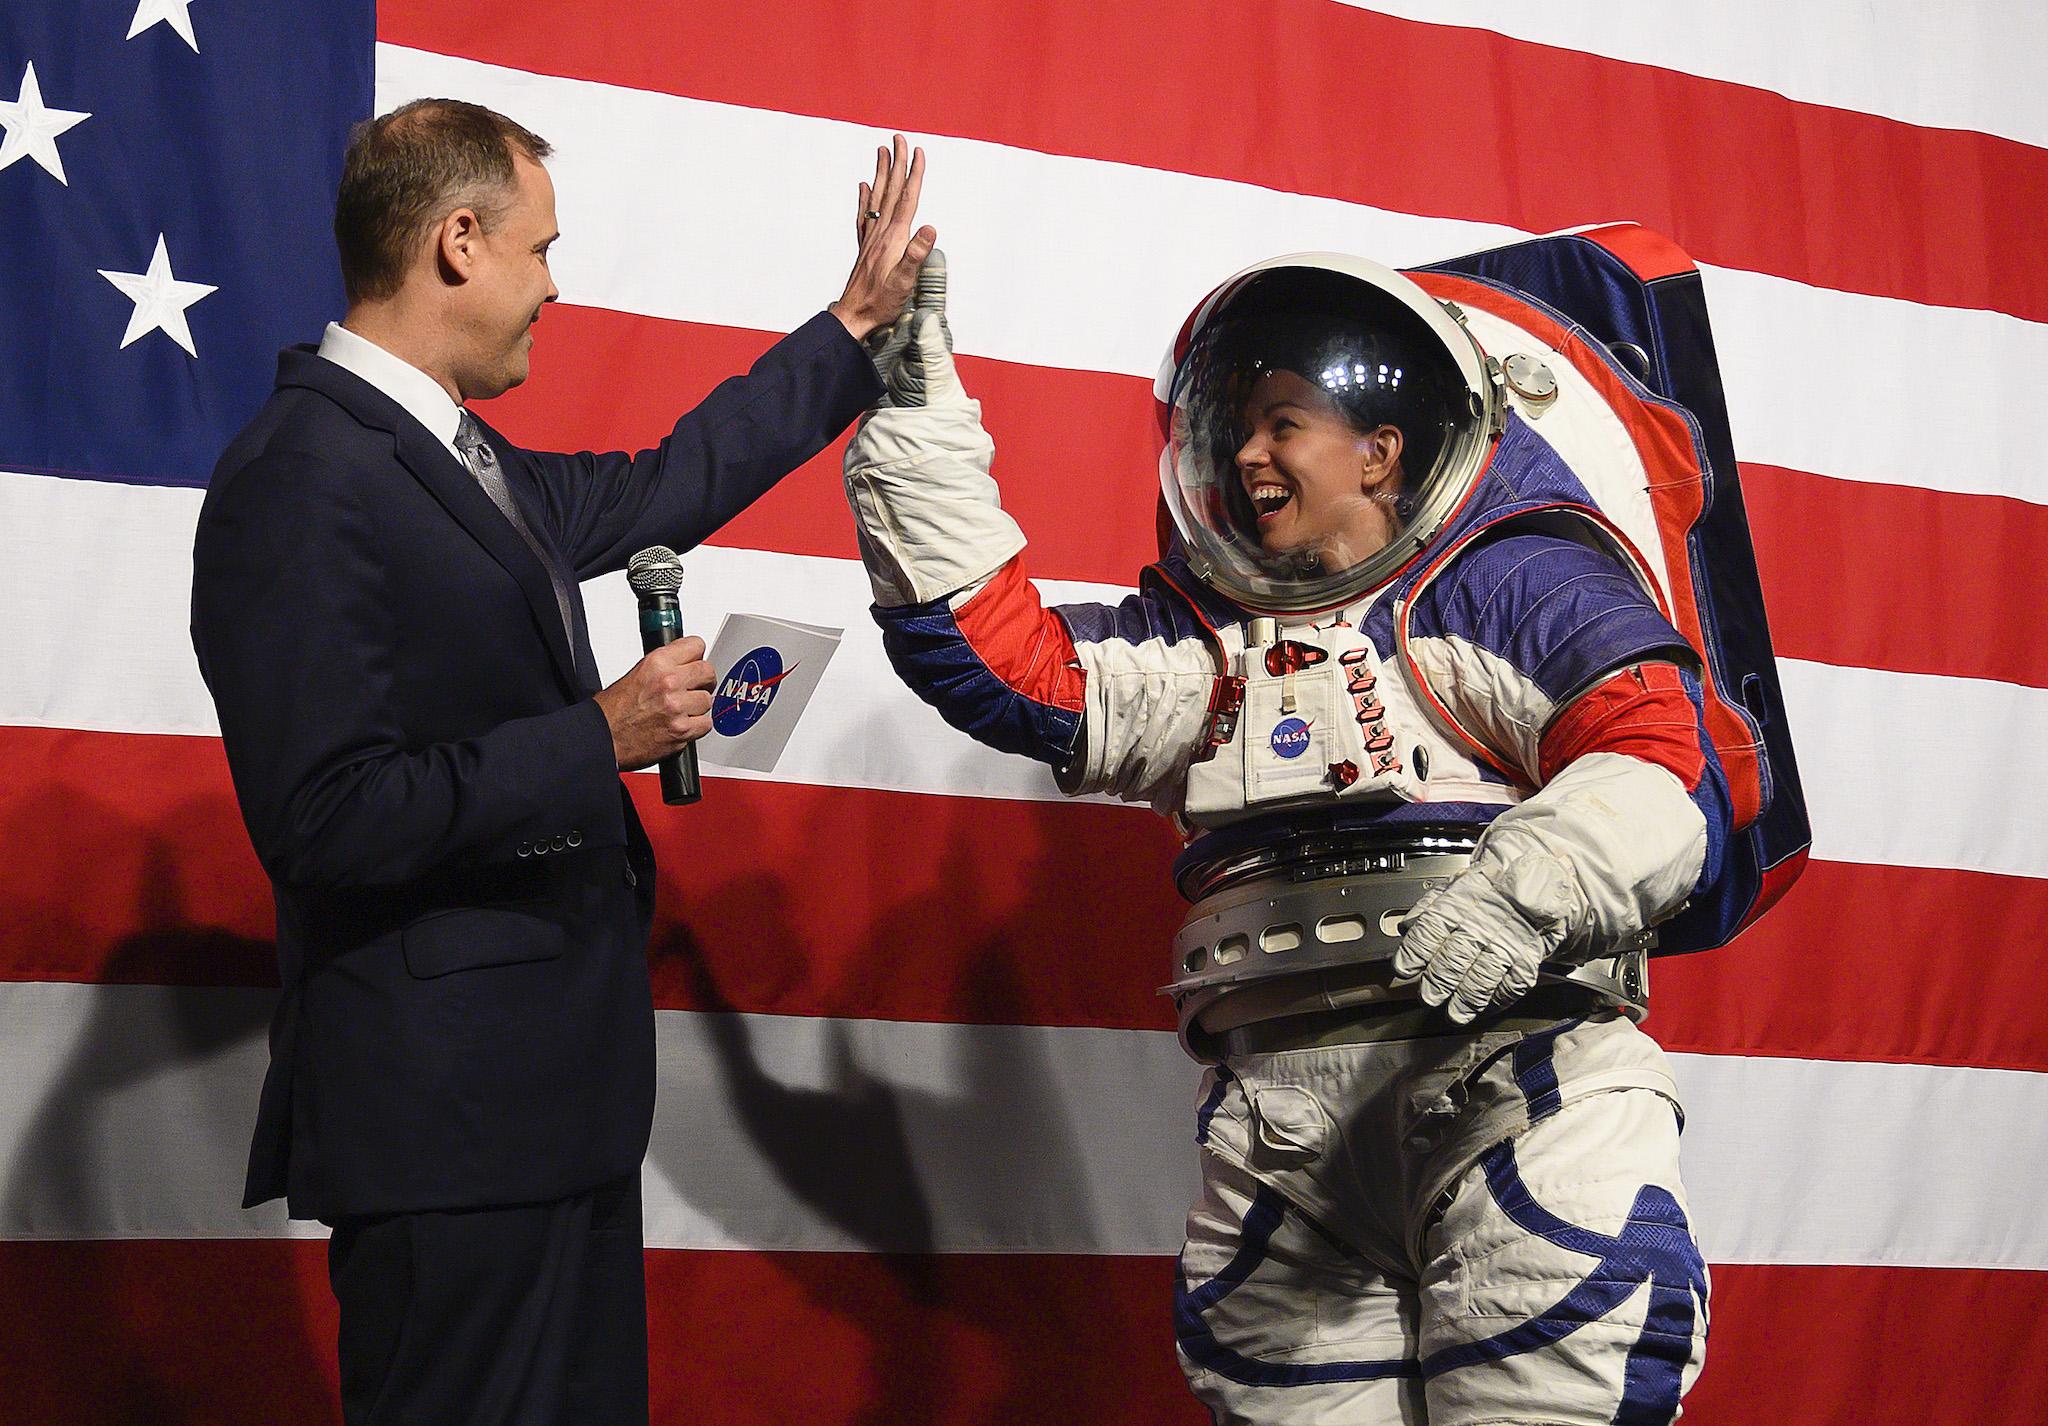 NASA administrator Jim Bridenstine (L) welcomes Advance space suit engineer, Kristine Davis (R), to the stage during a press conference displaying the next generation of space suits as parts of the Artemis program in Washington, DC